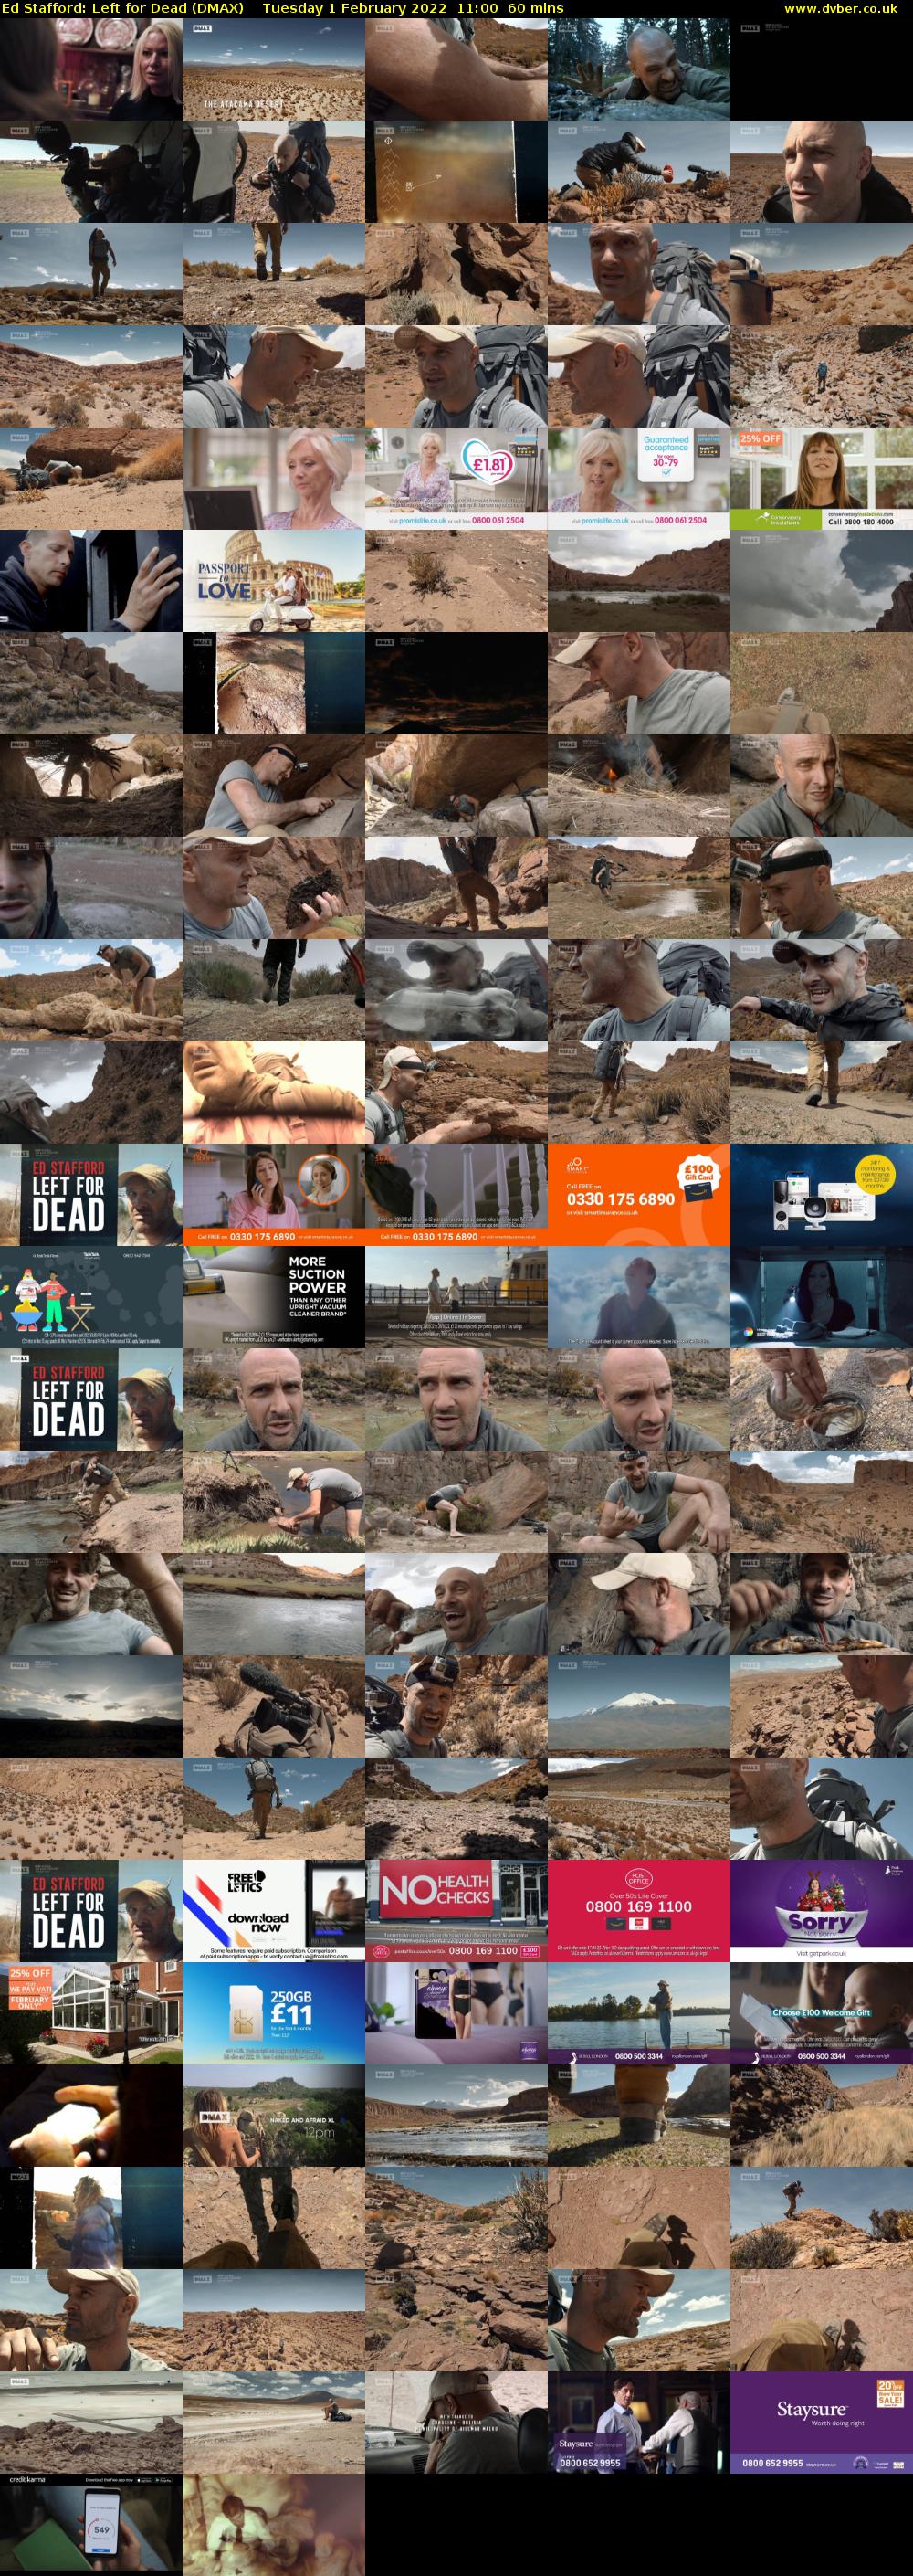 Ed Stafford: Left for Dead (DMAX) Tuesday 1 February 2022 11:00 - 12:00